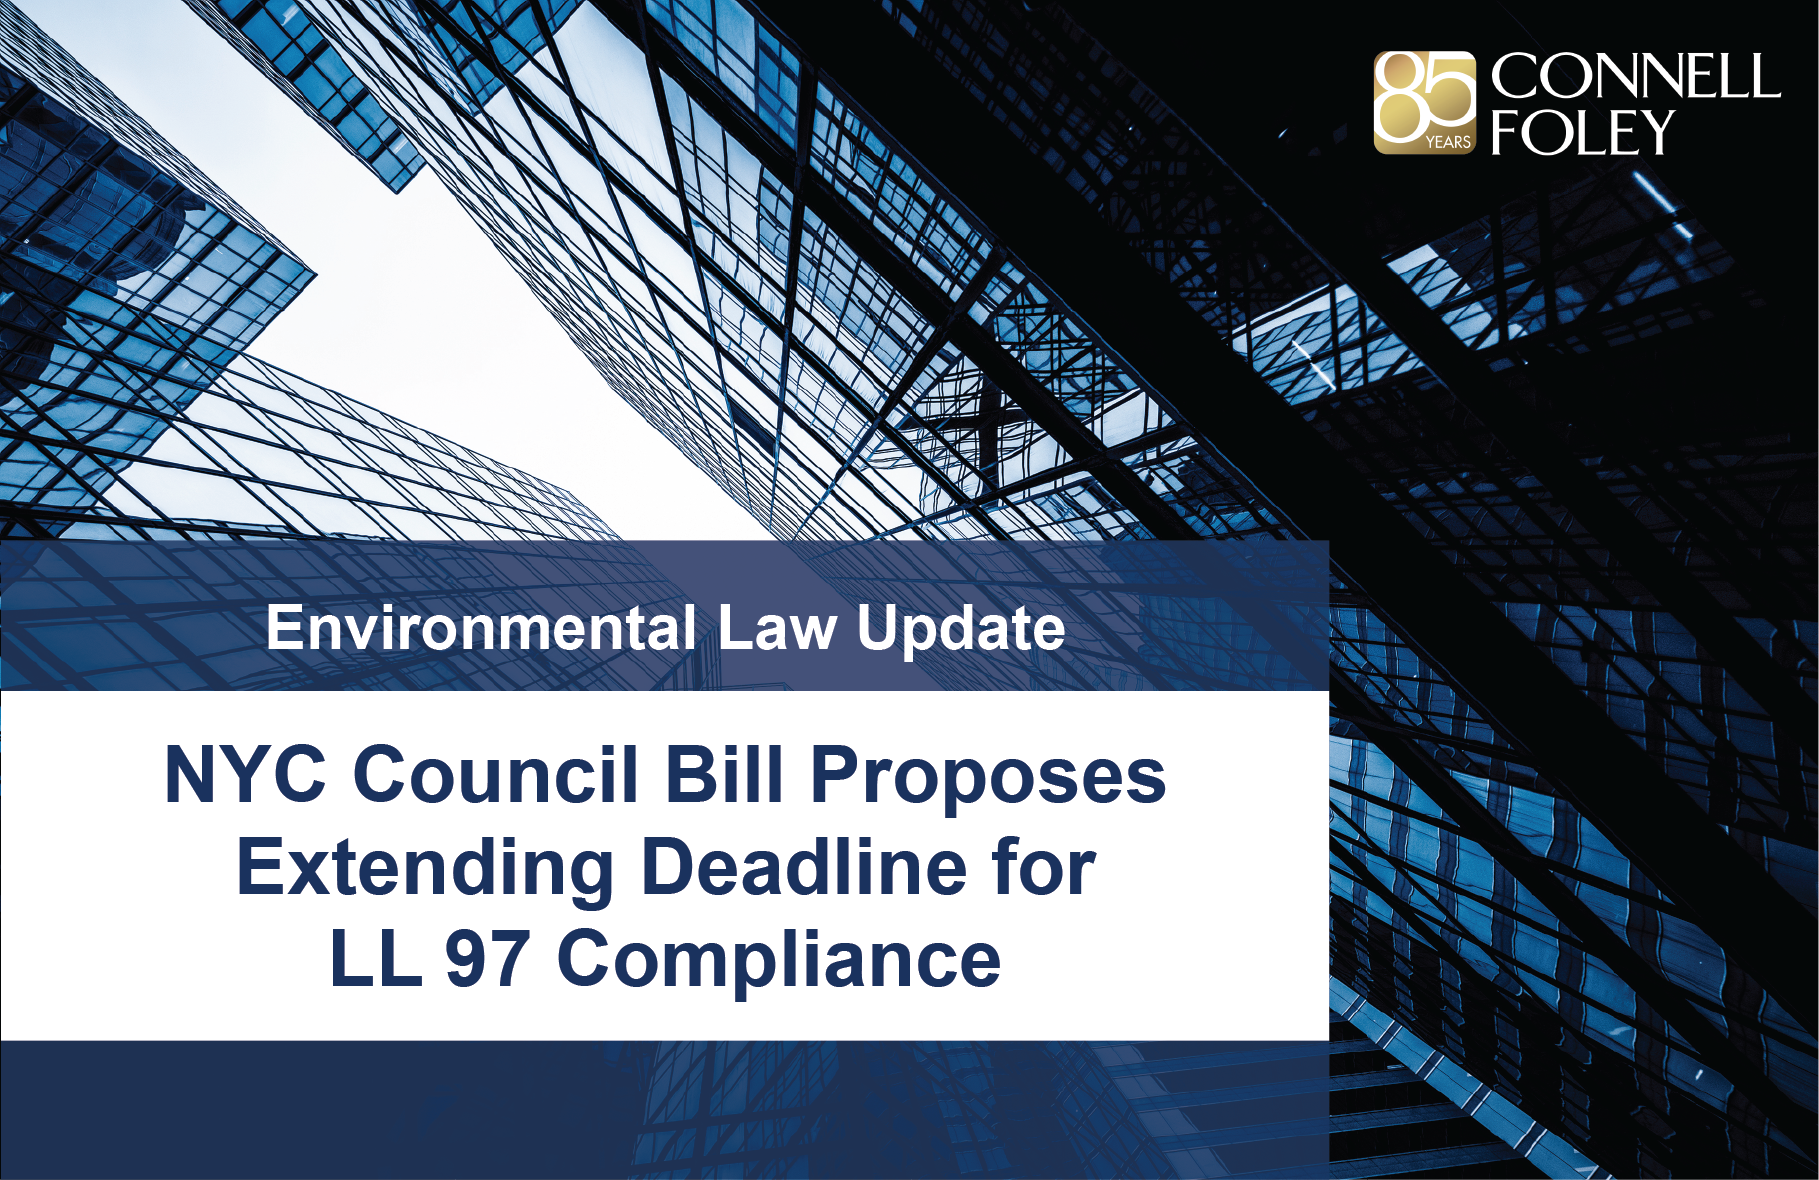 NYC Council Bill Proposes Extending Deadline for LL 97 Compliance